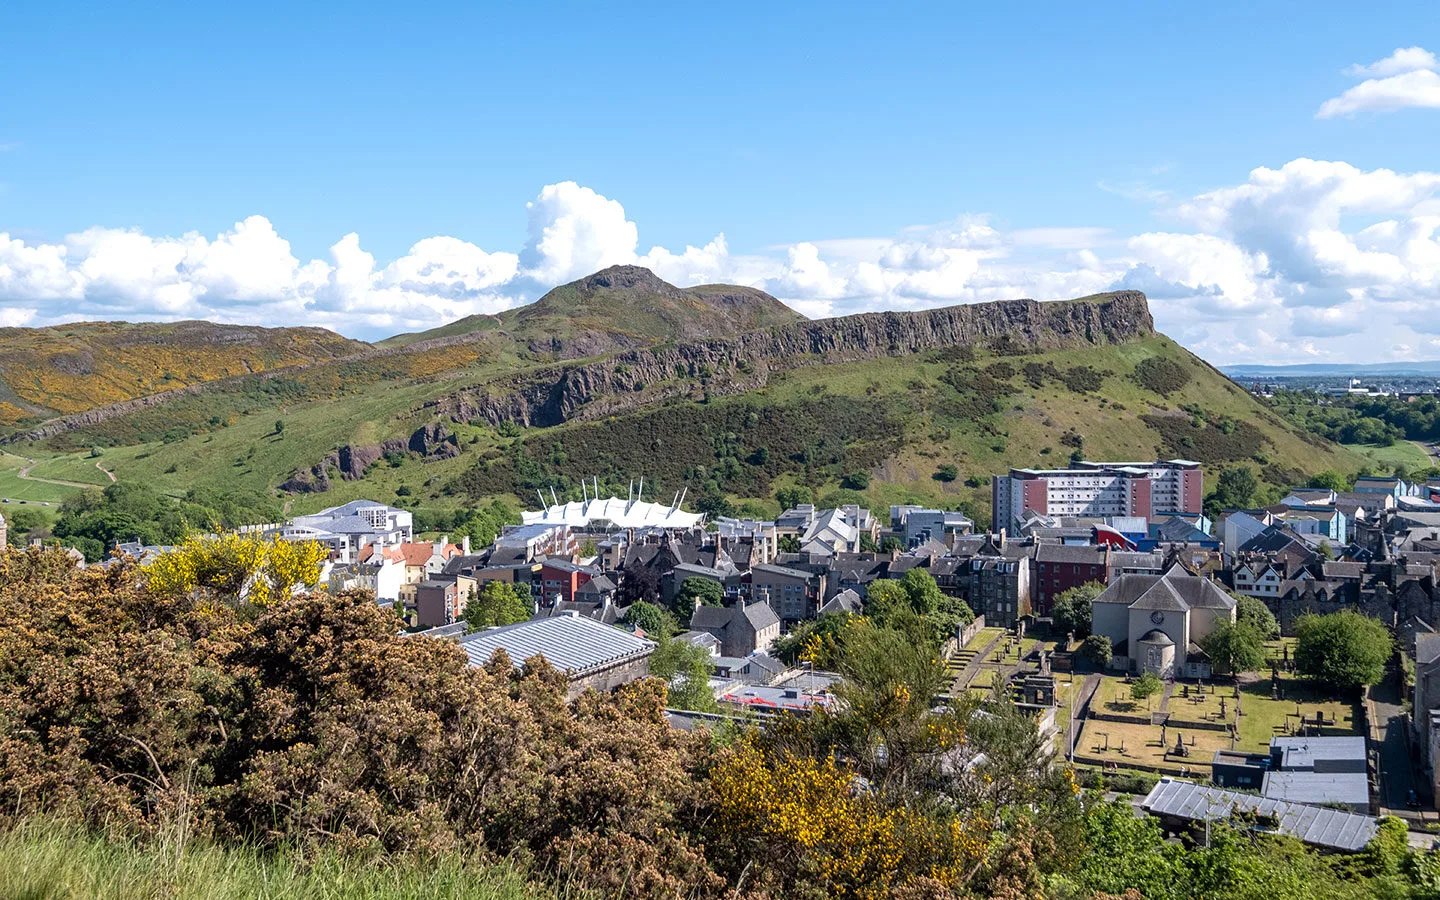 Views of Arthur's Seat and Dynamic Earth from Calton Hill